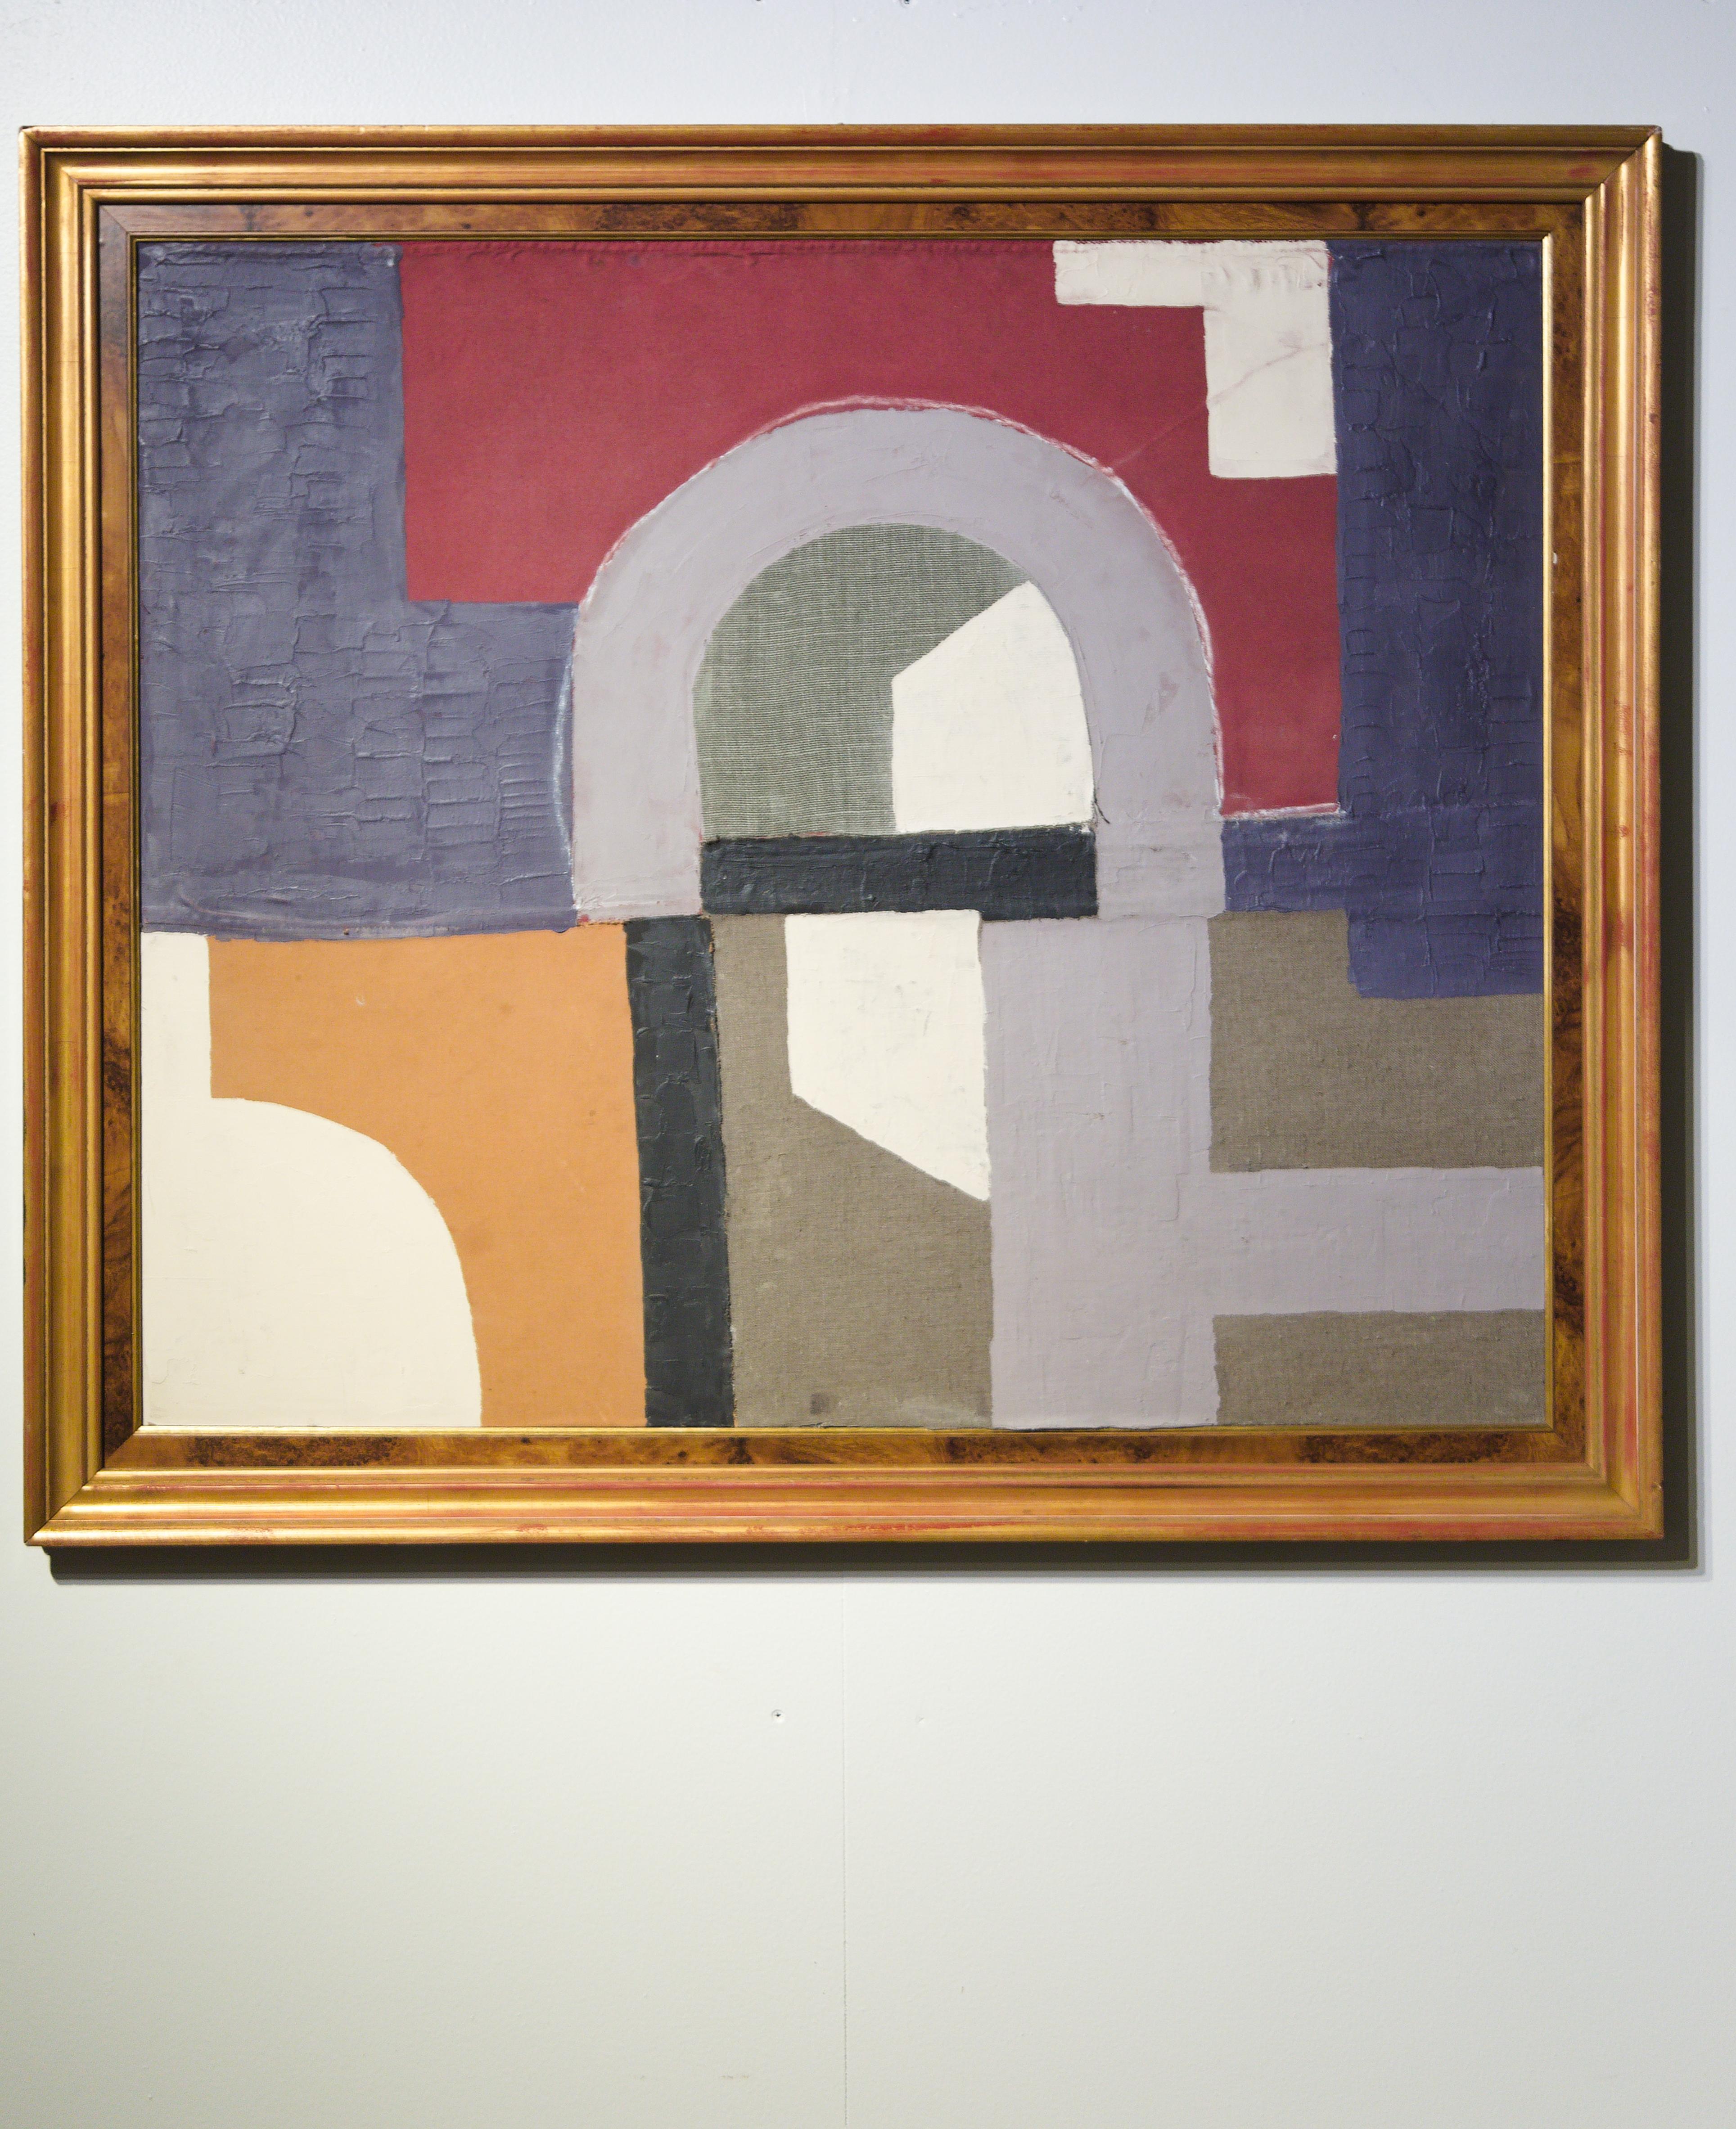 A framed textile collage by artist Raoul Morren, made in 2023. The dynamic composition is created with a concerto of expressionistic geometric shapes, boldly rendered in blue, yellow, red and green. Designed to be displayed with any